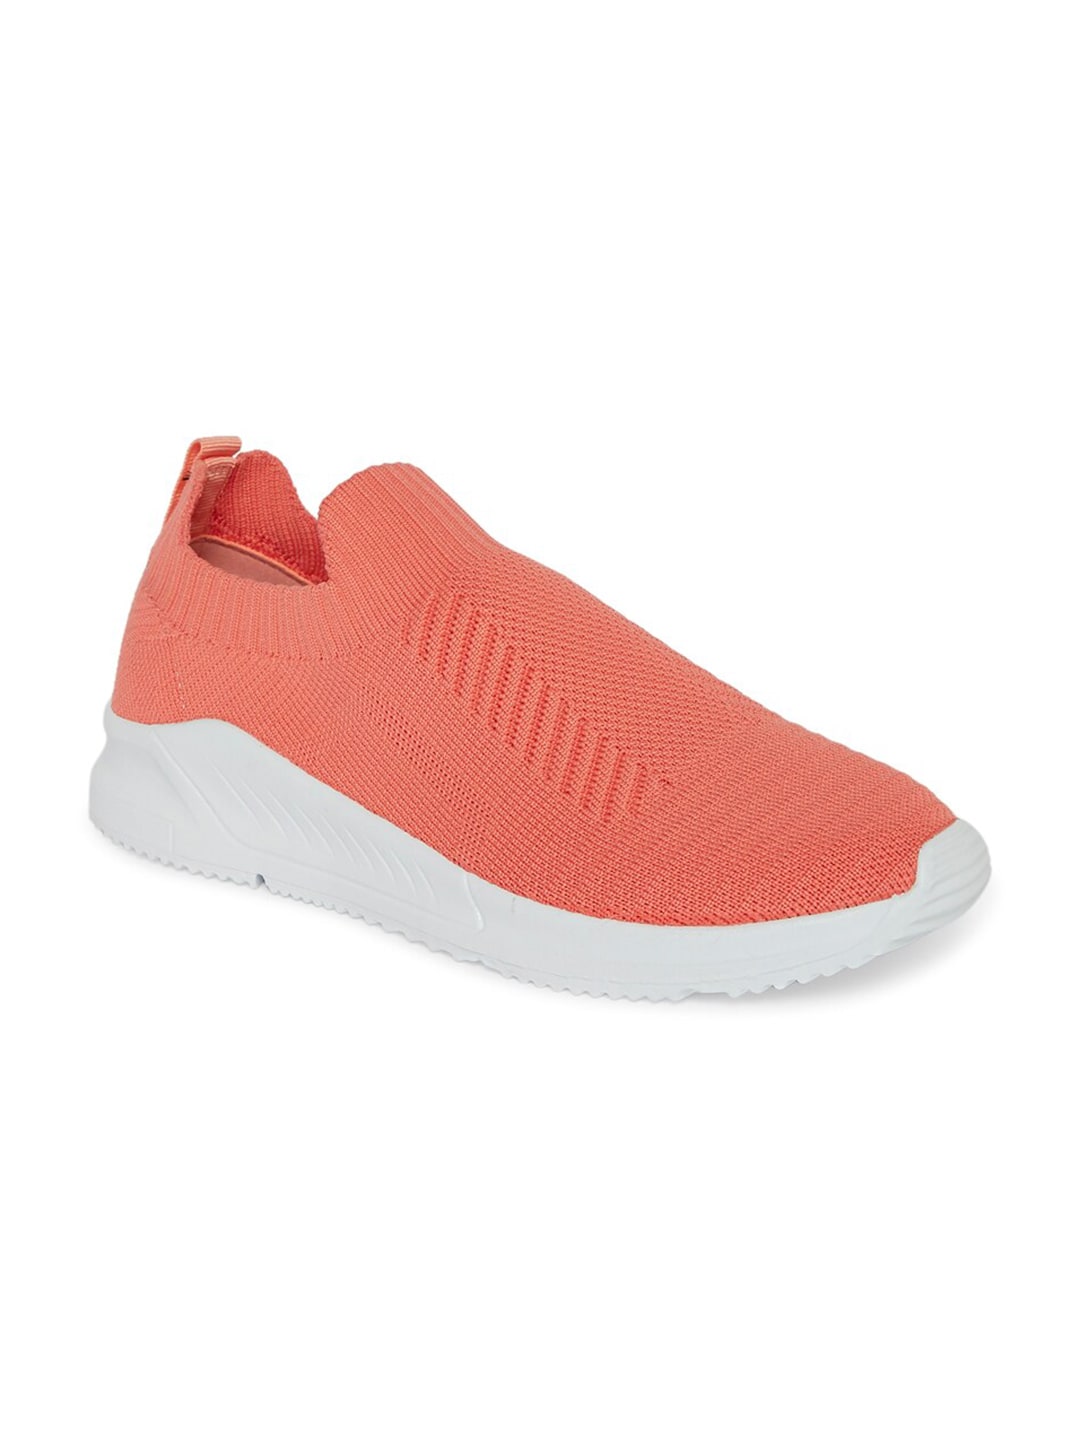 Forever Glam by Pantaloons Women Coral Running Non-Marking Shoes Price in India